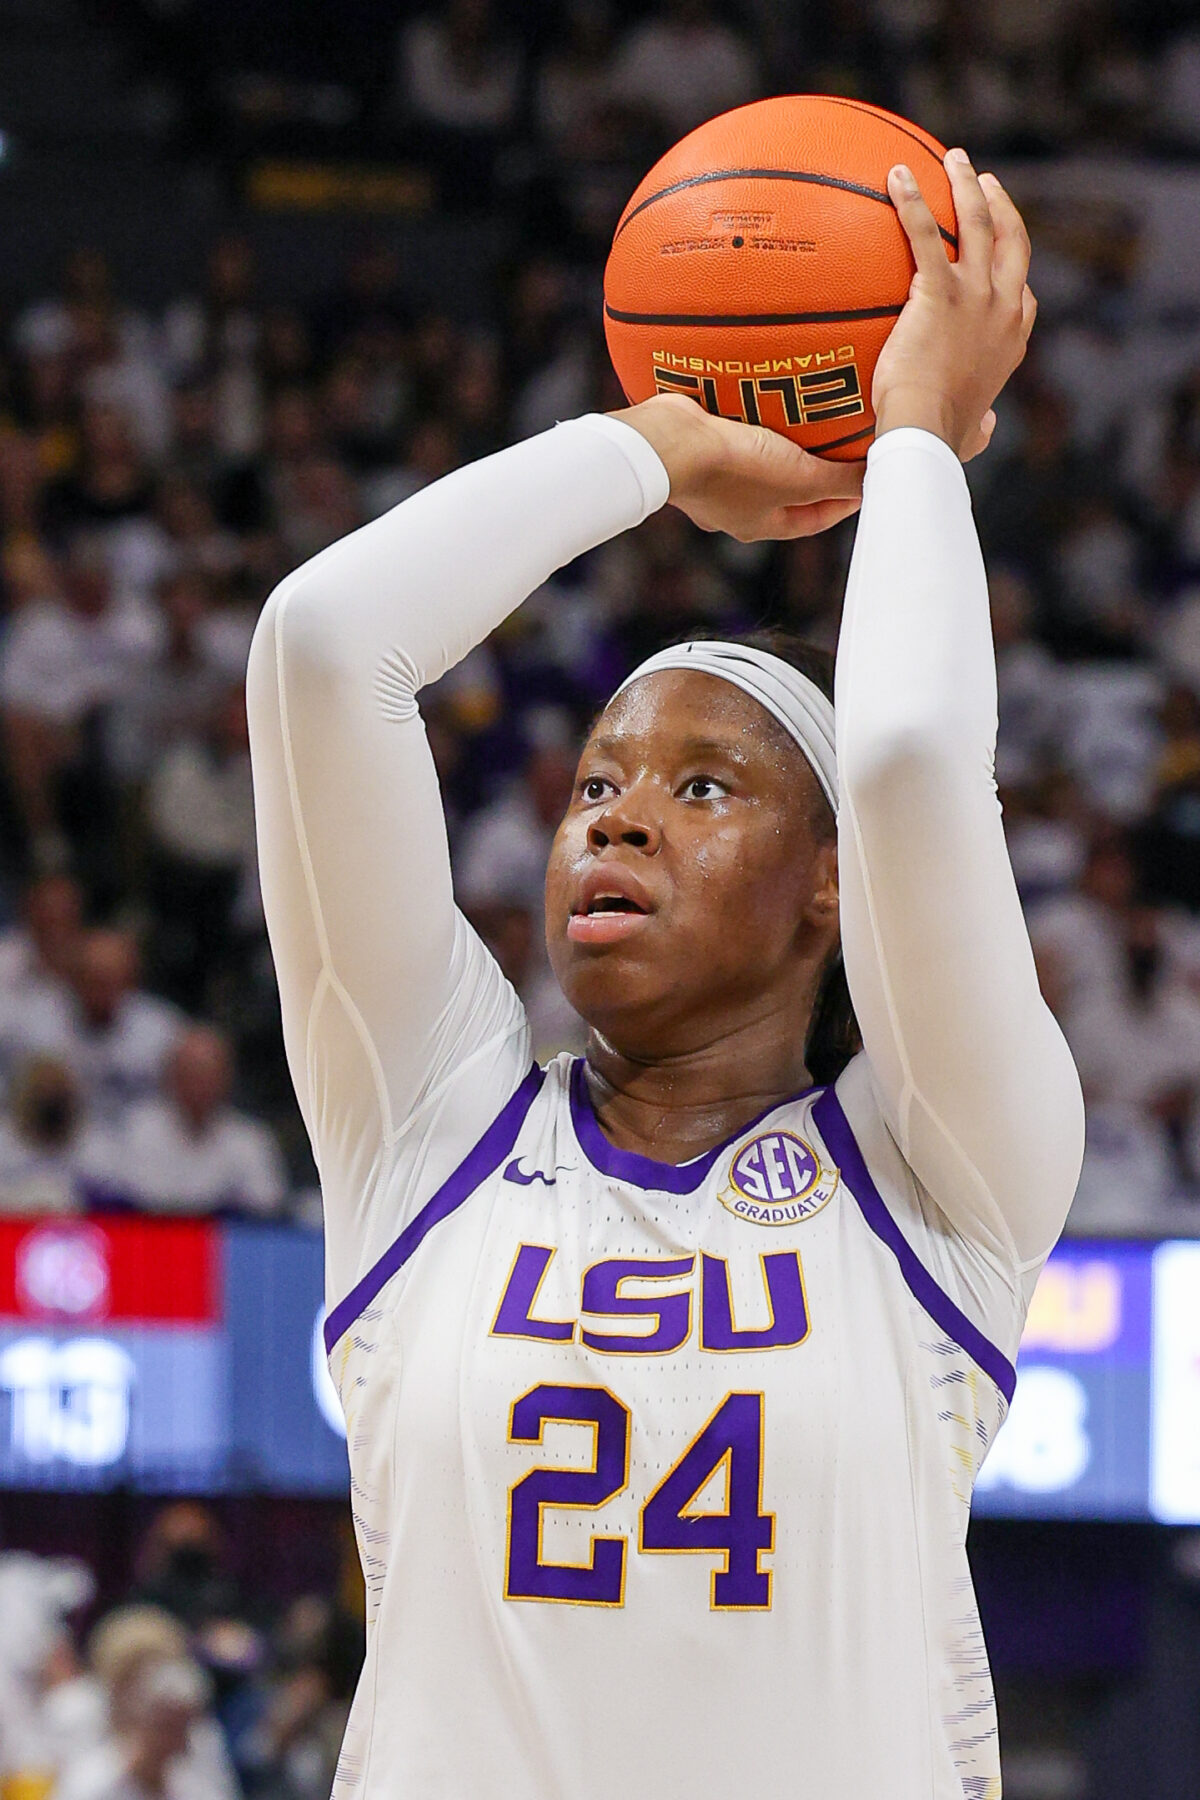 LSU women’s basketball beats Florida in front of sellout crowd